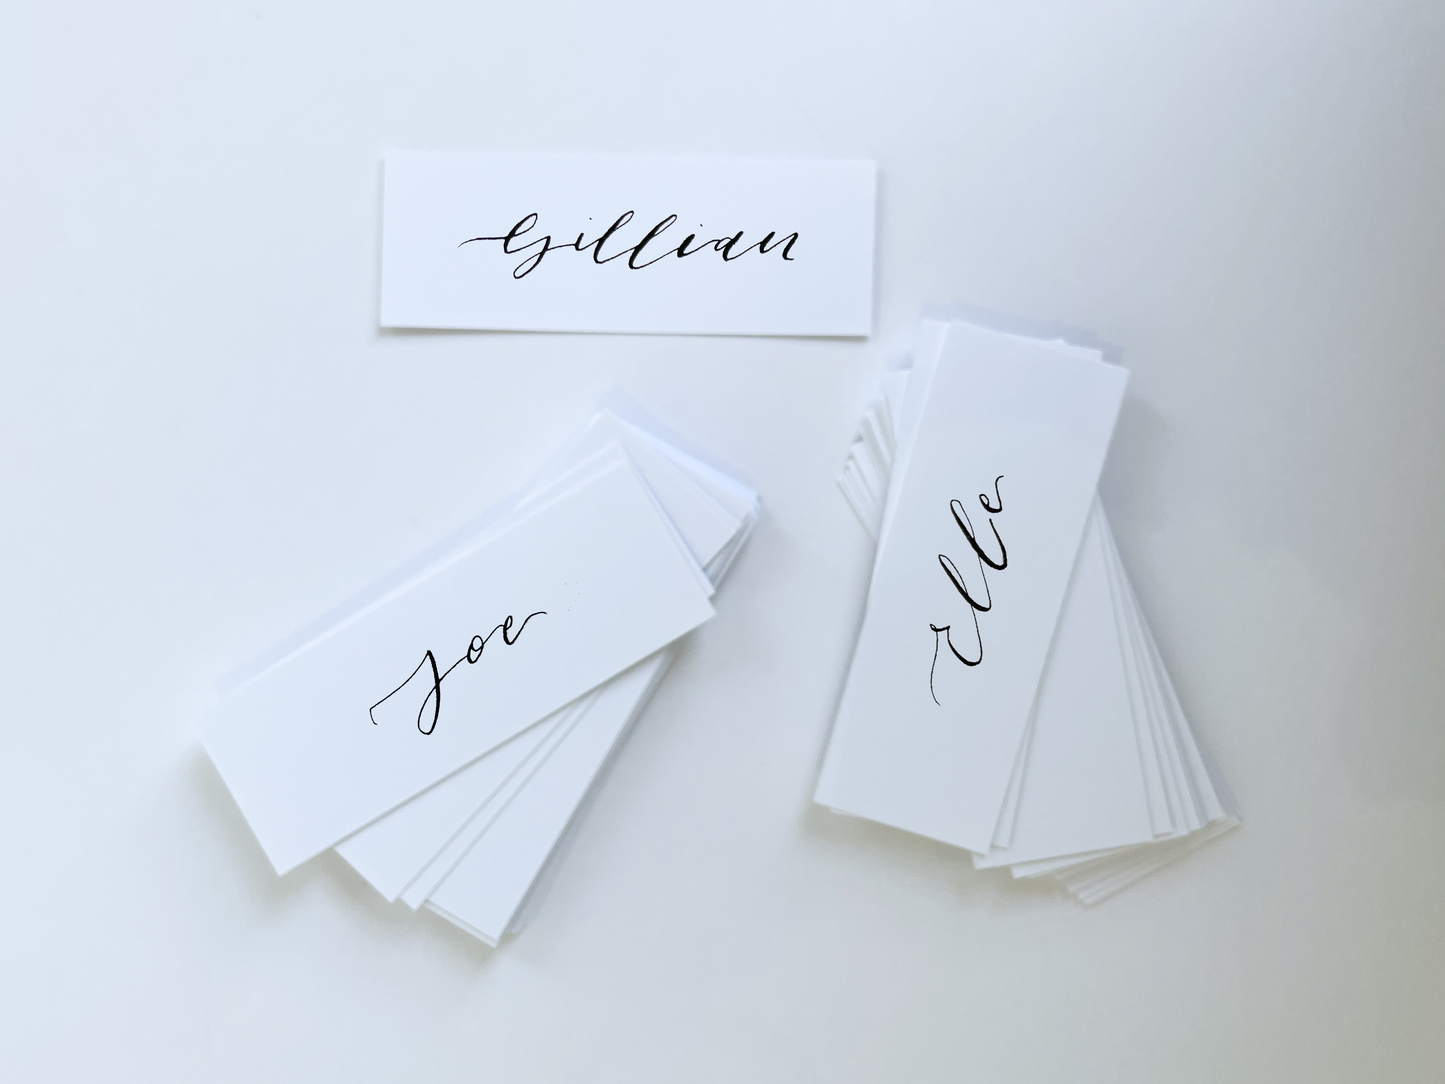 Calligraphy Wedding Place Name Card | White Card with Hand Written Calligraphy optional gold or silver eyelet